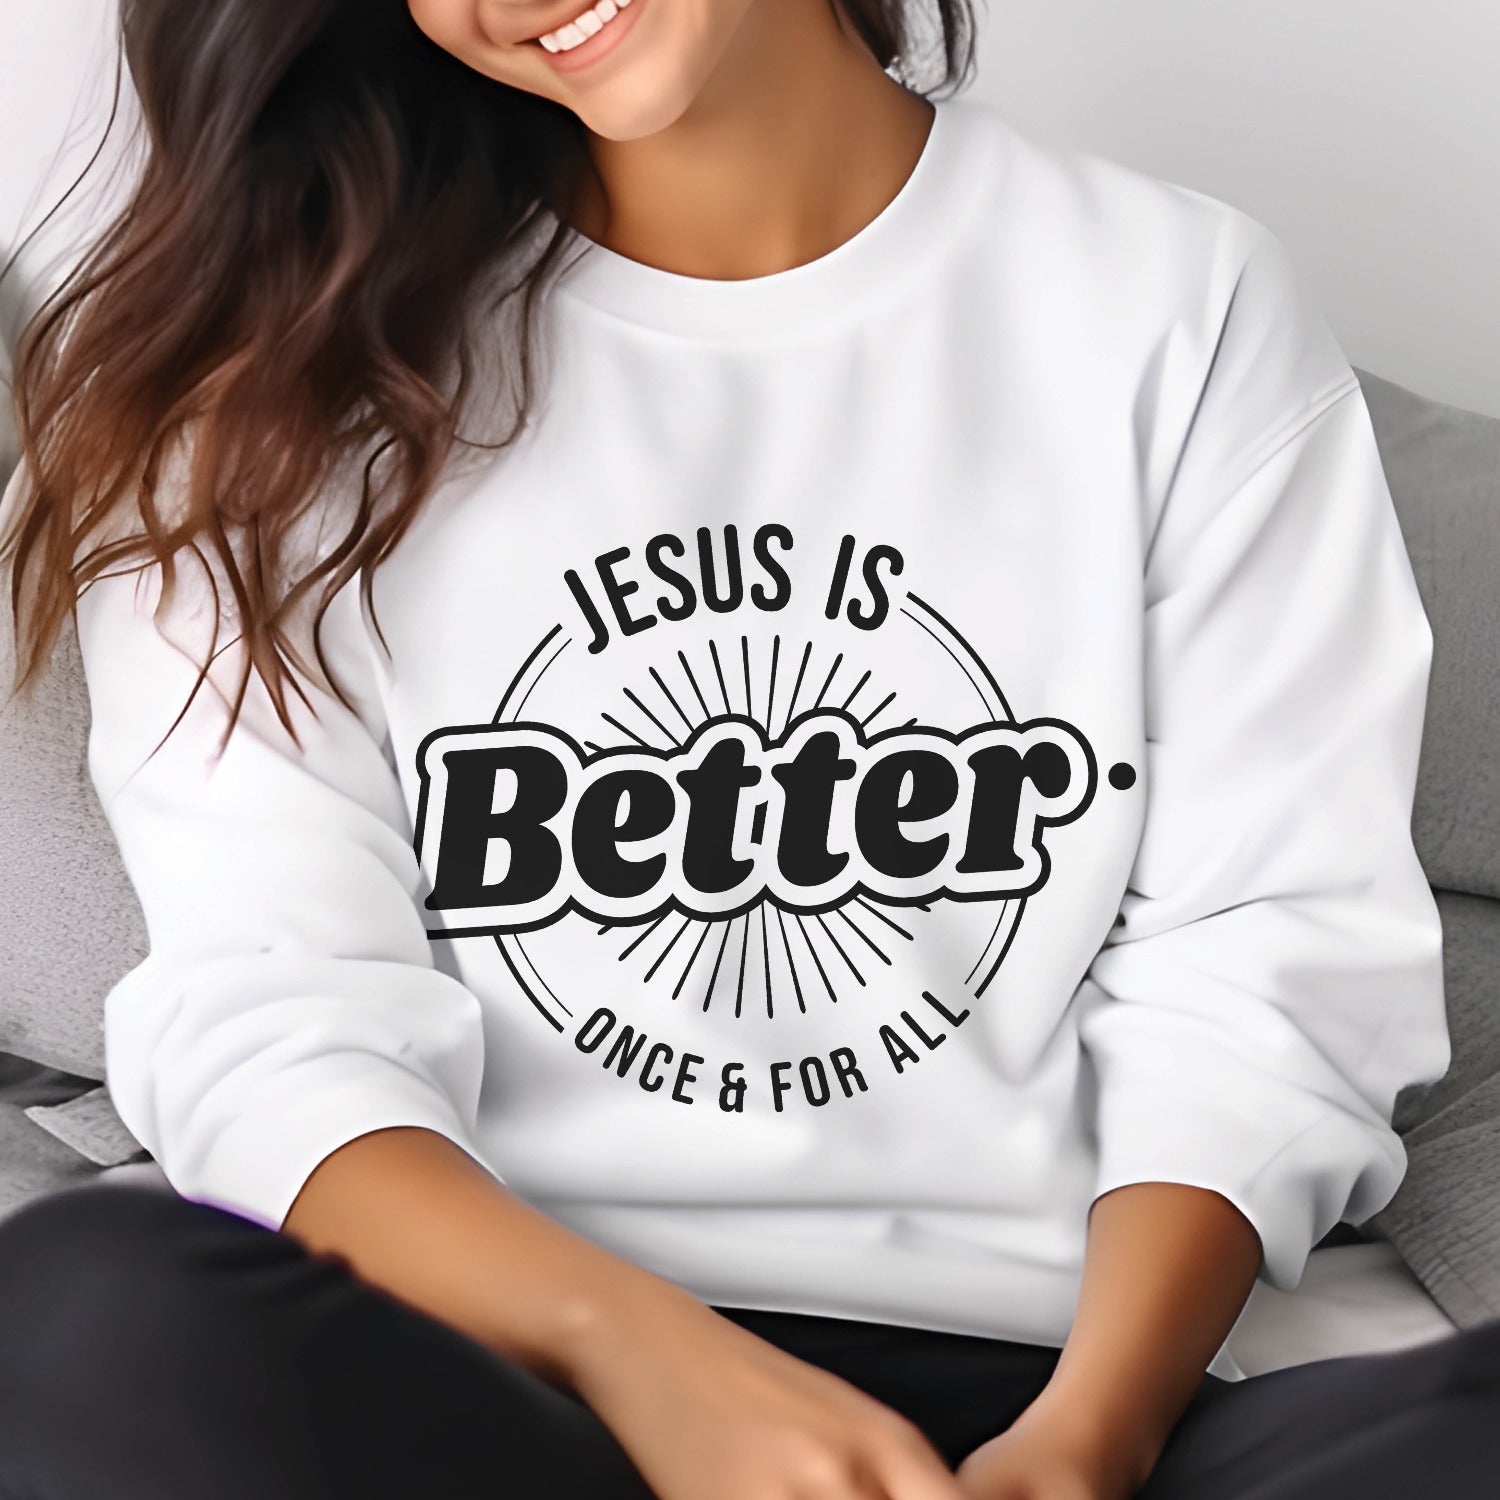 White faith-based cozy sweatshirt with "Jesus is BETTER - Once and For All" logo style design in black, created for Christian men and women